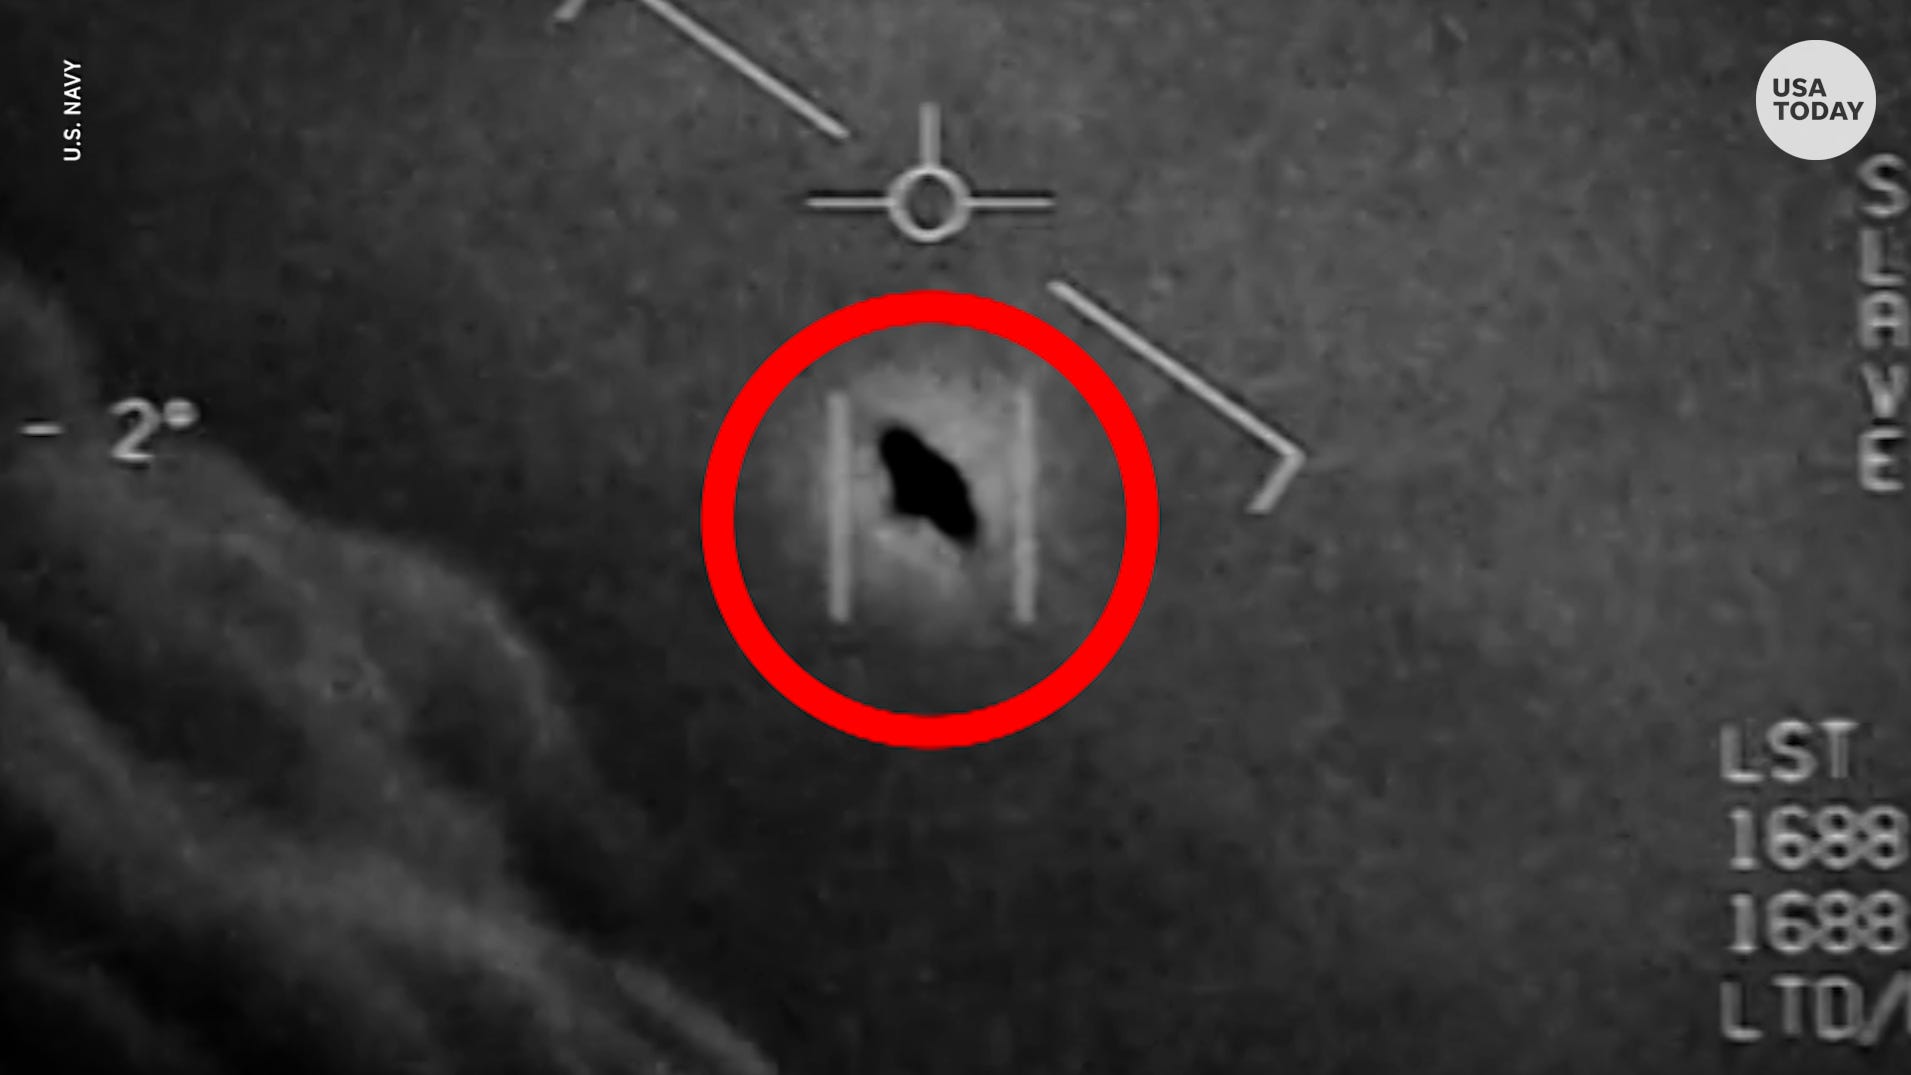 UFO report Pentagon finds no evidence of aliens, doesn't rule it out